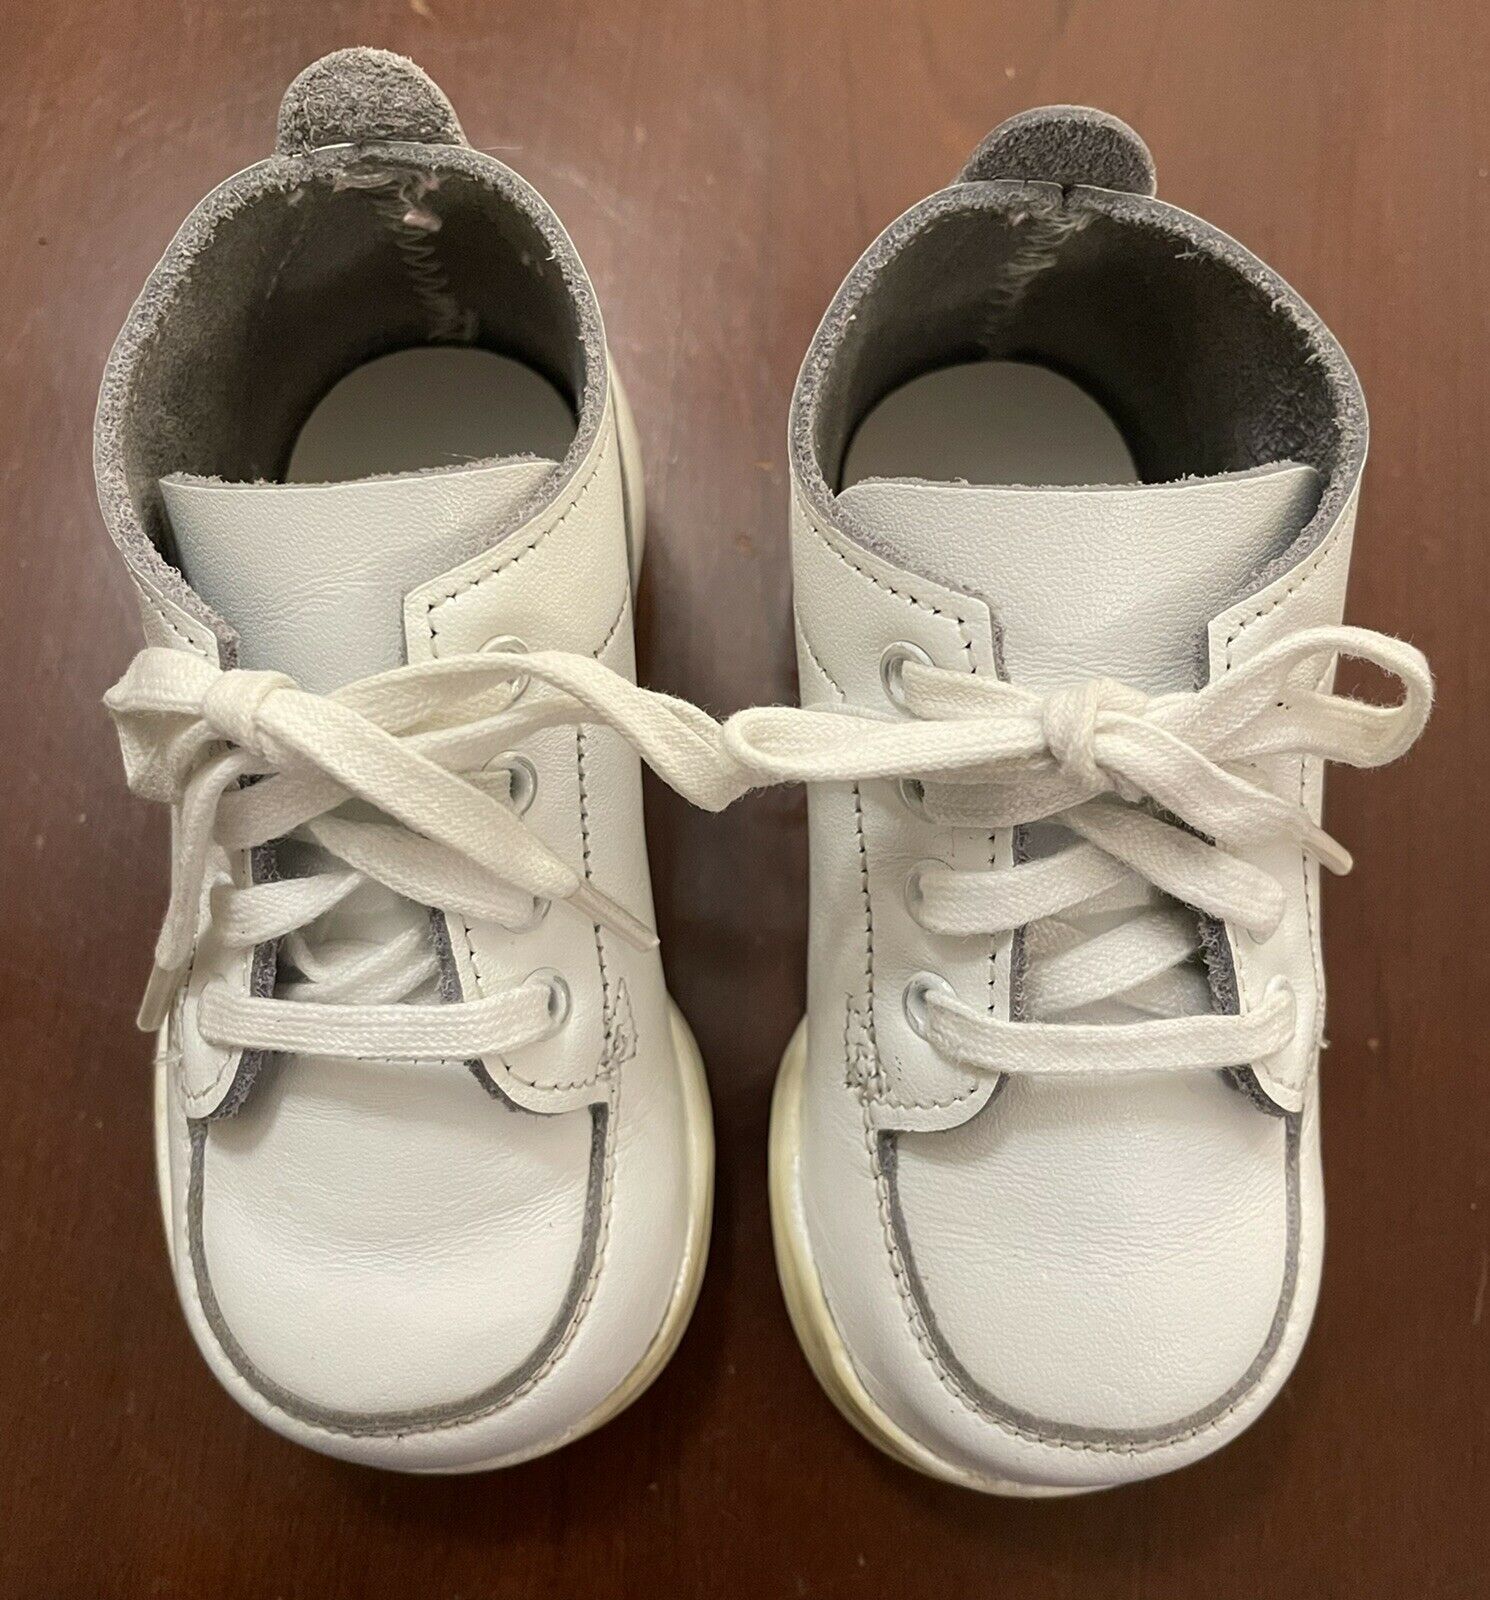 STRIDE-RITE White Leather Mid/Top Flexible Walking Shoes, Baby Shoe Size 1